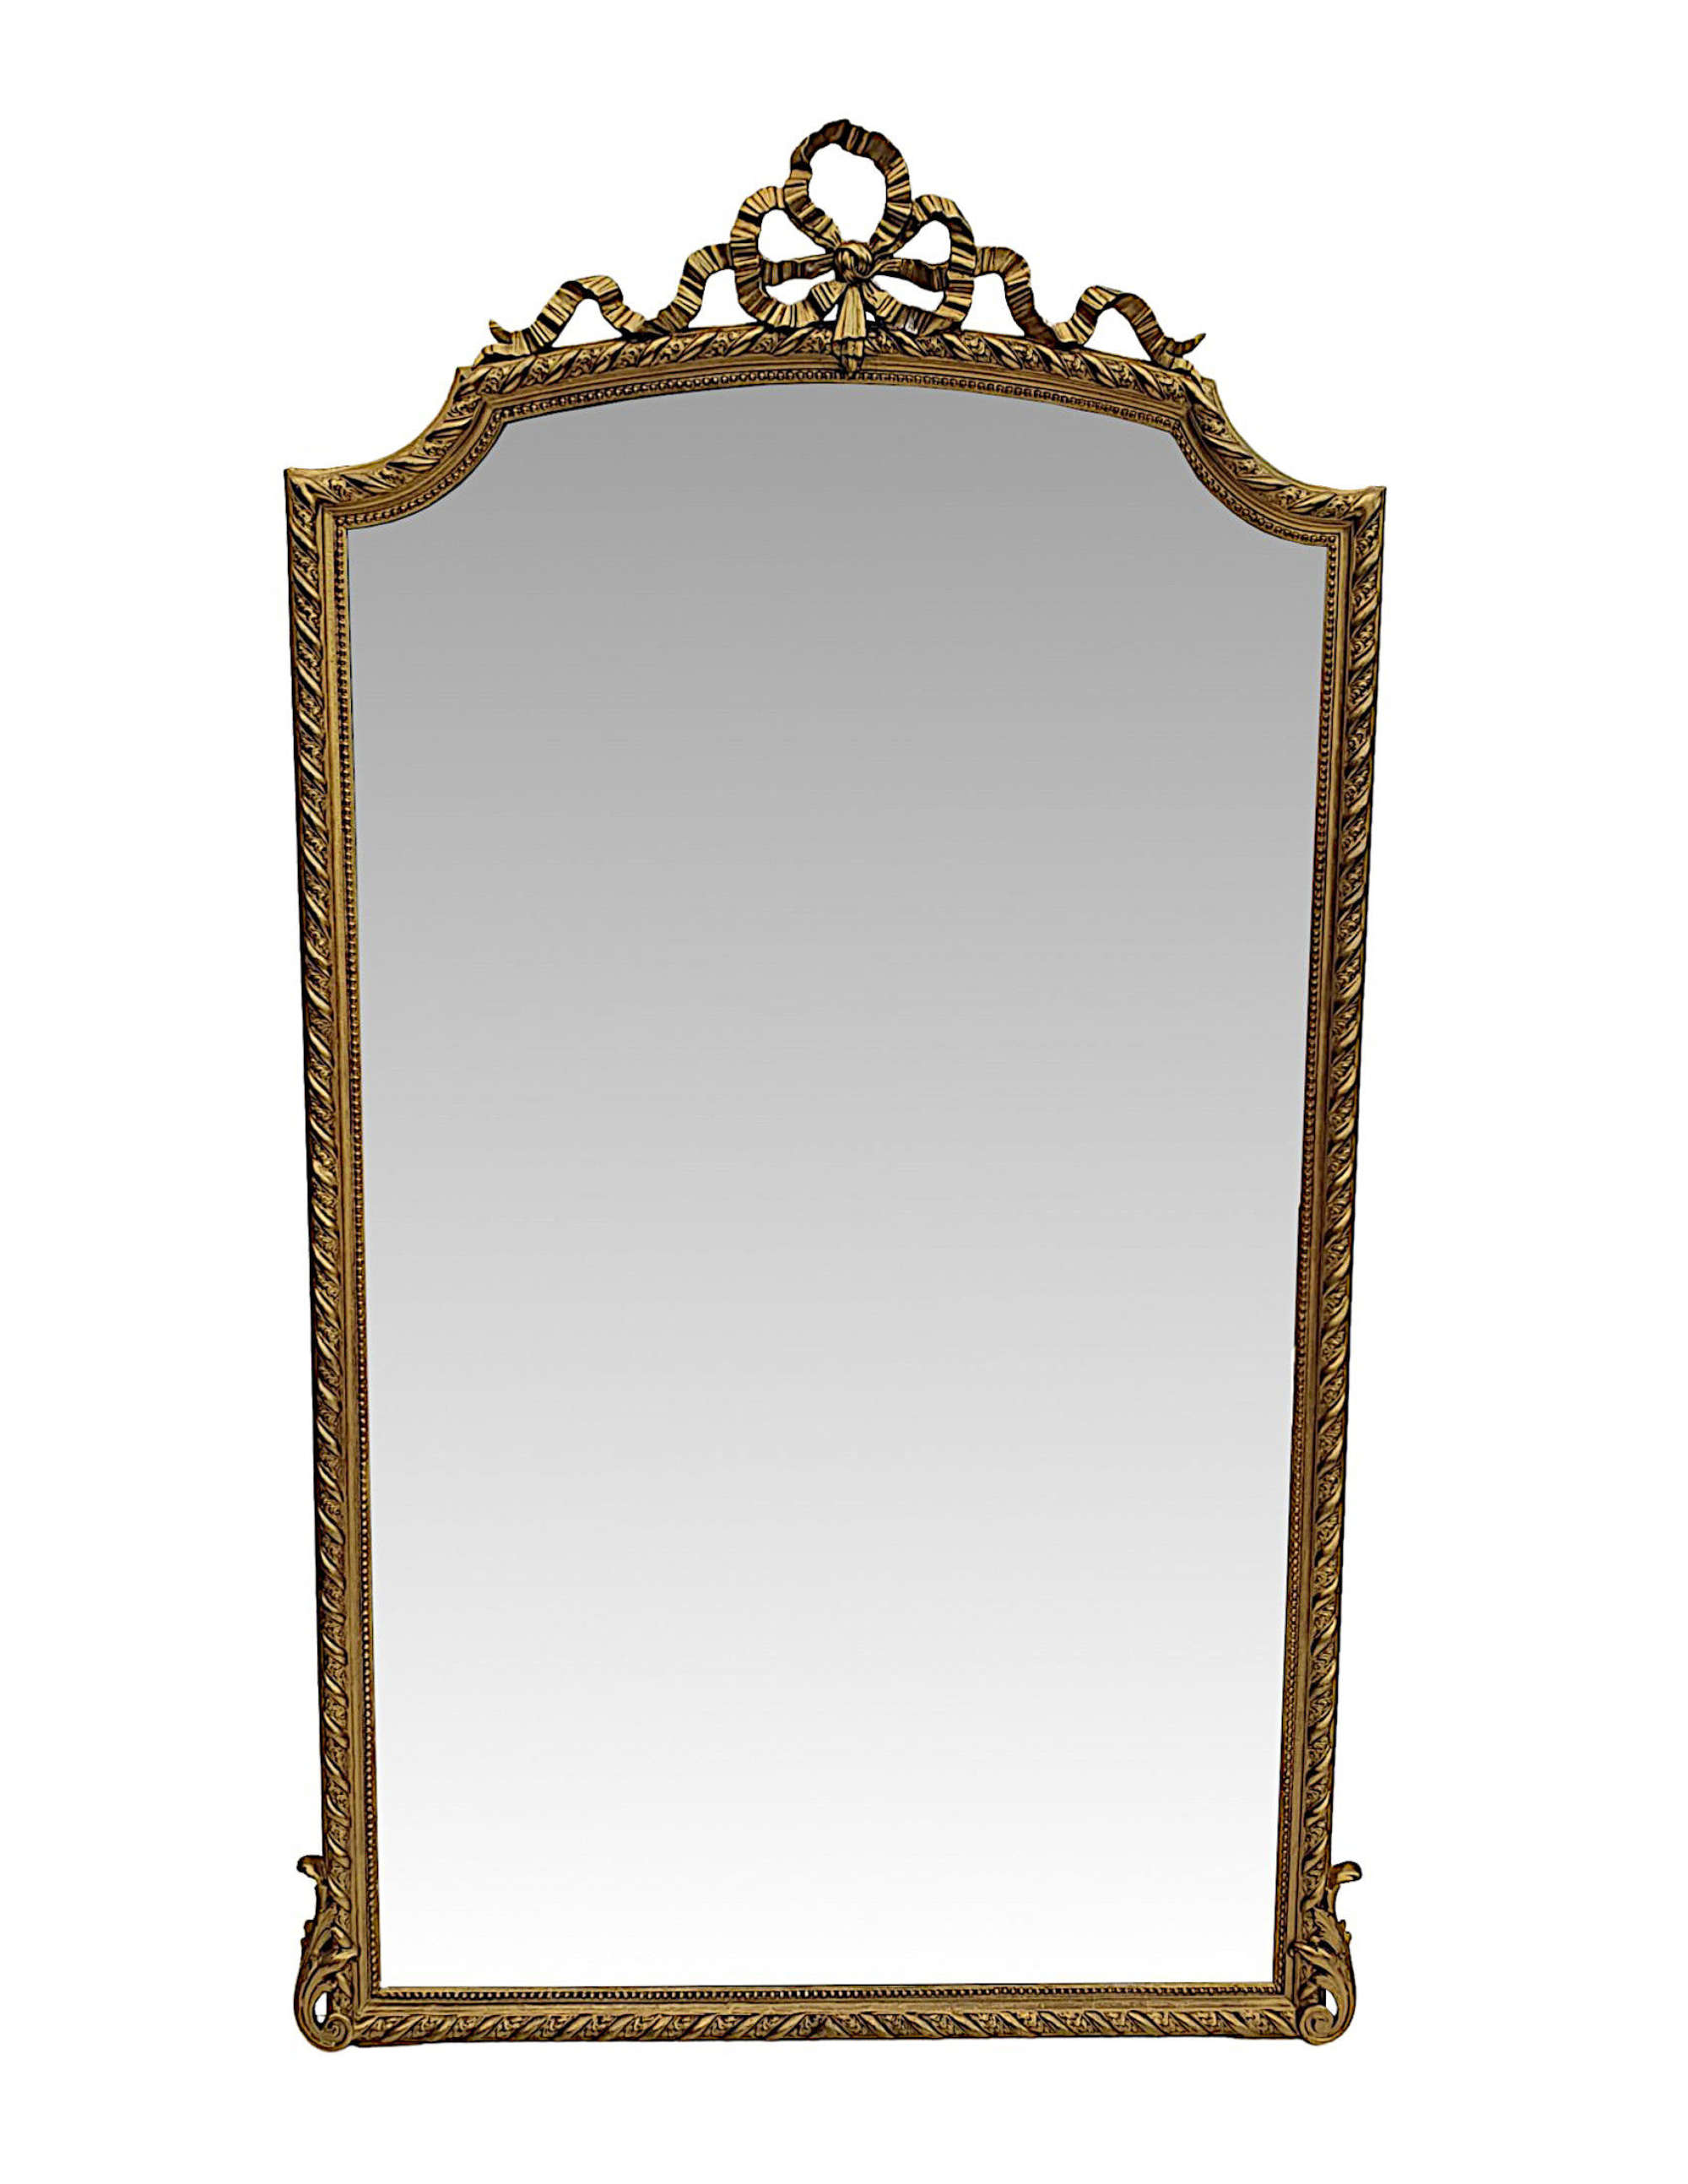 A Very Fine 19th Century Giltwood Leaner or Hall or Overmantle Mirror